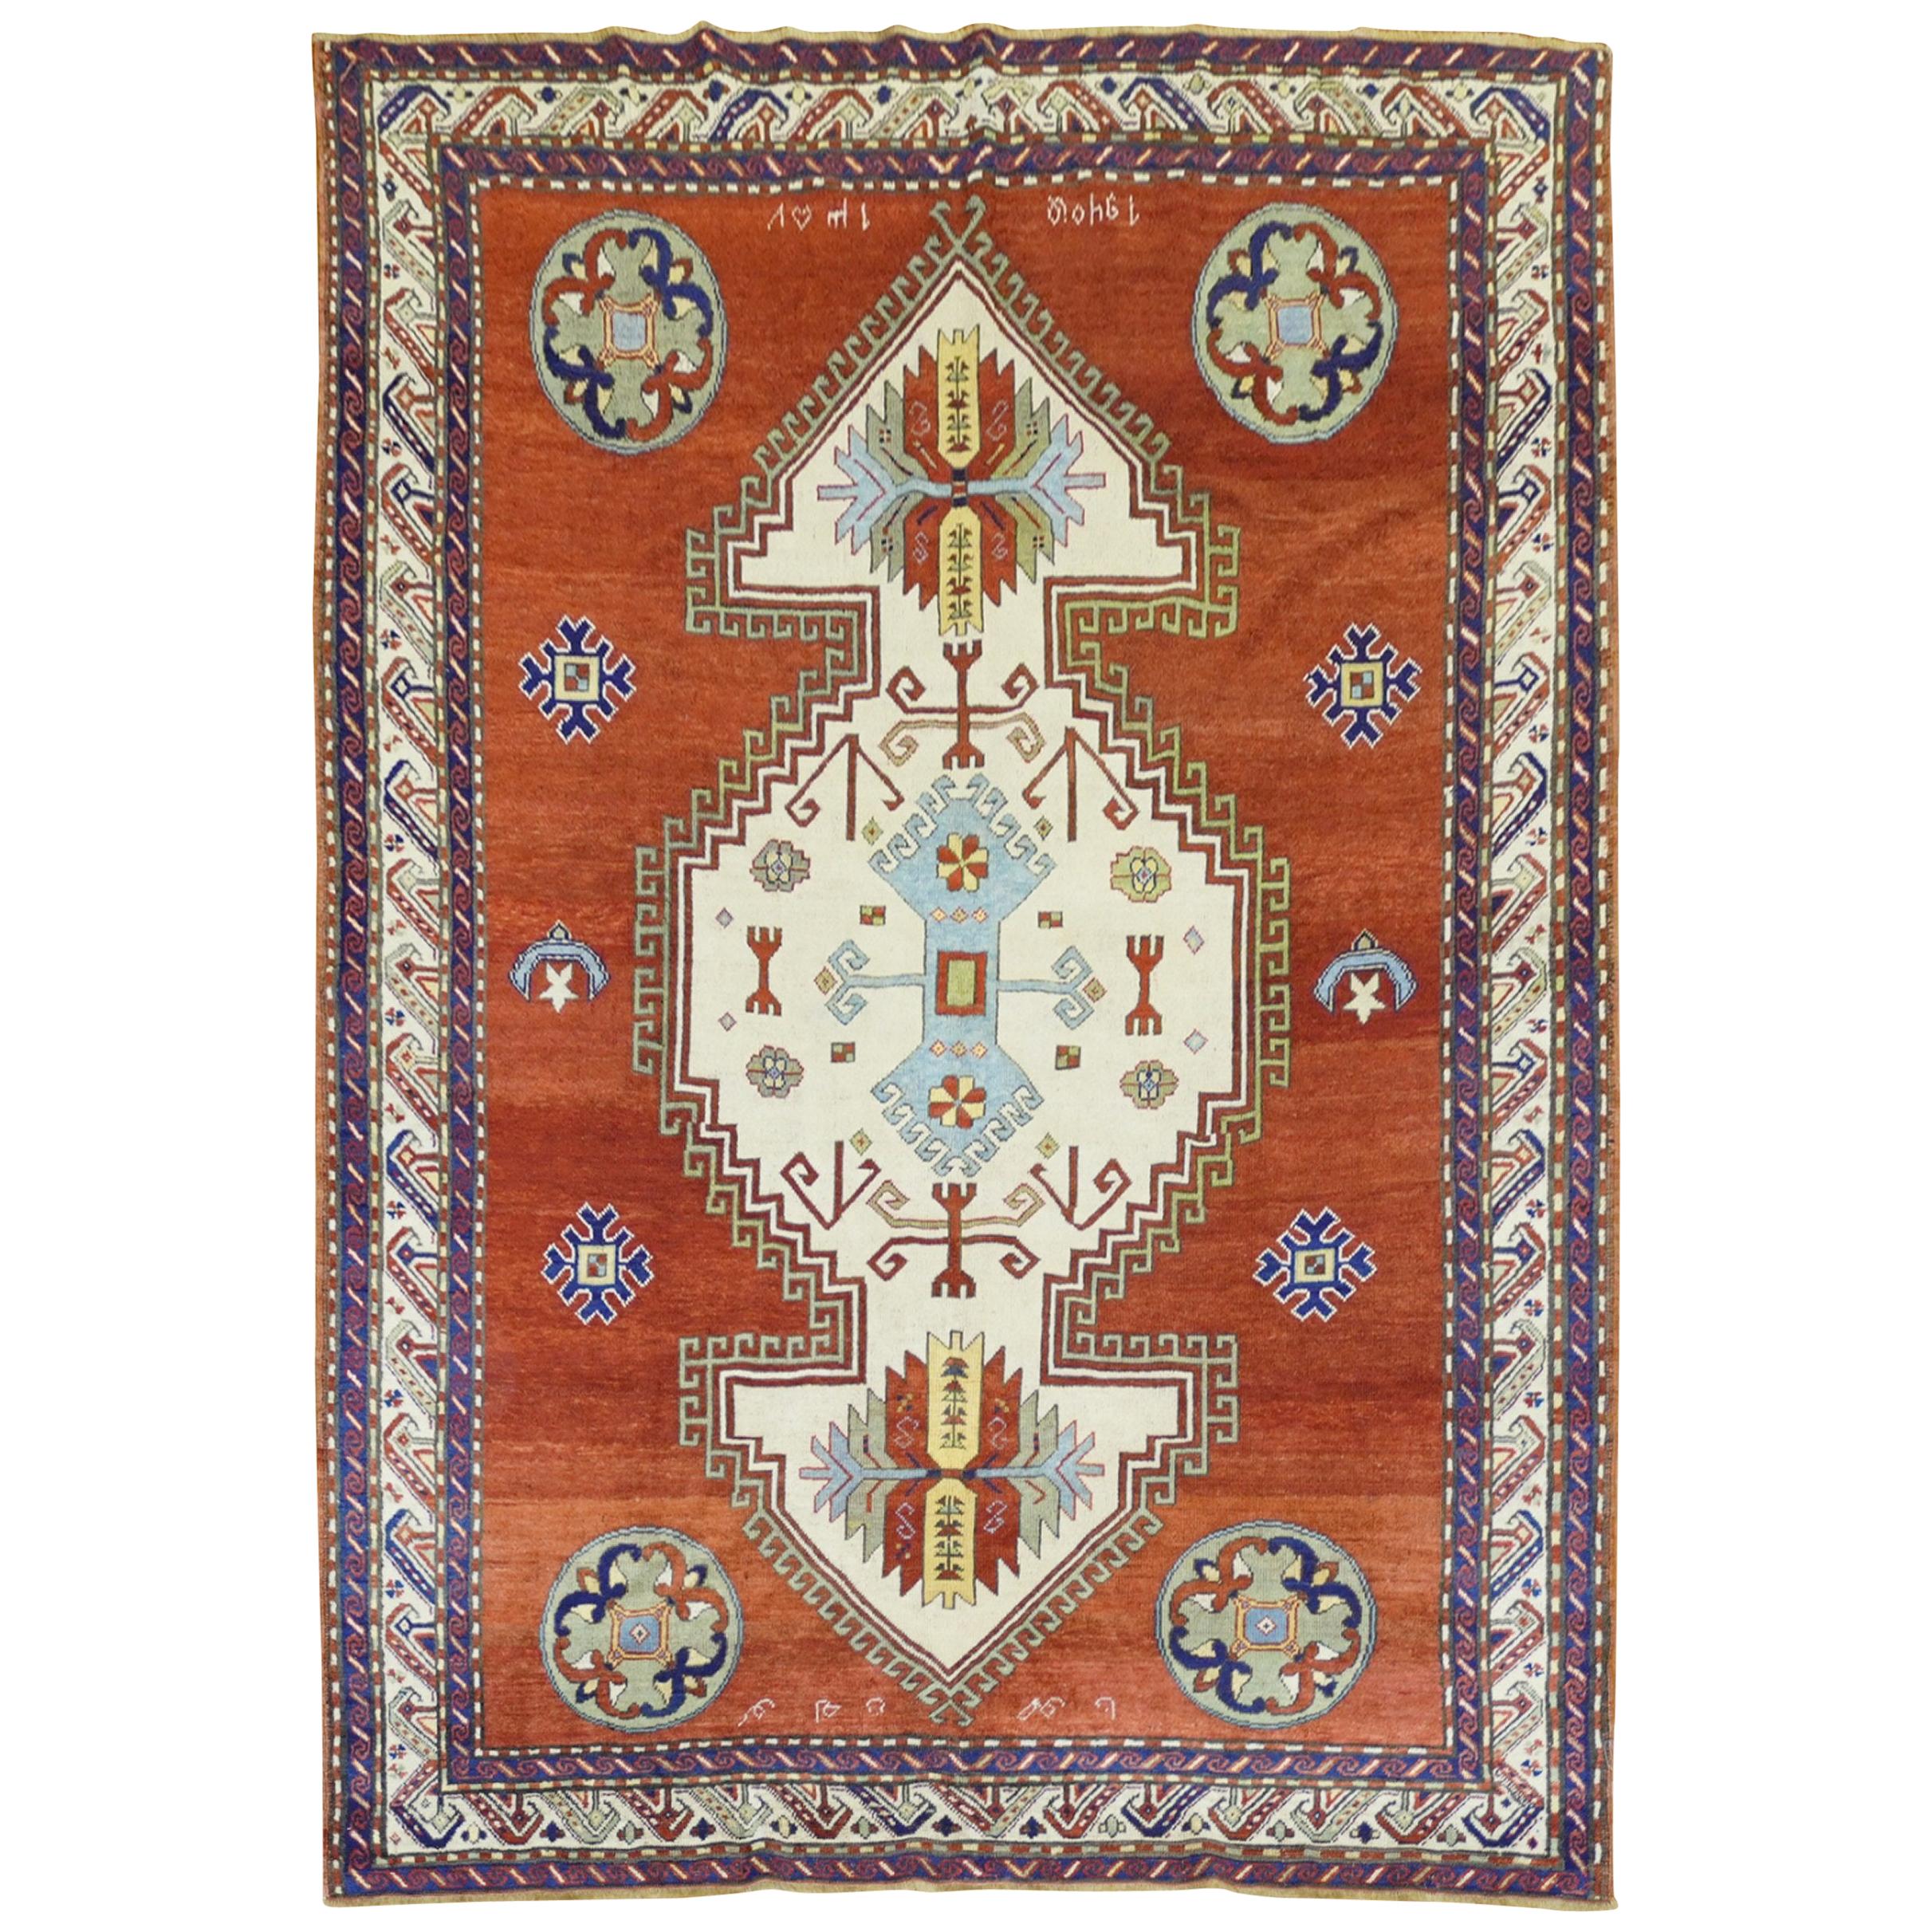 Madder Red Armenian Antique Rug, Dated 1940 For Sale